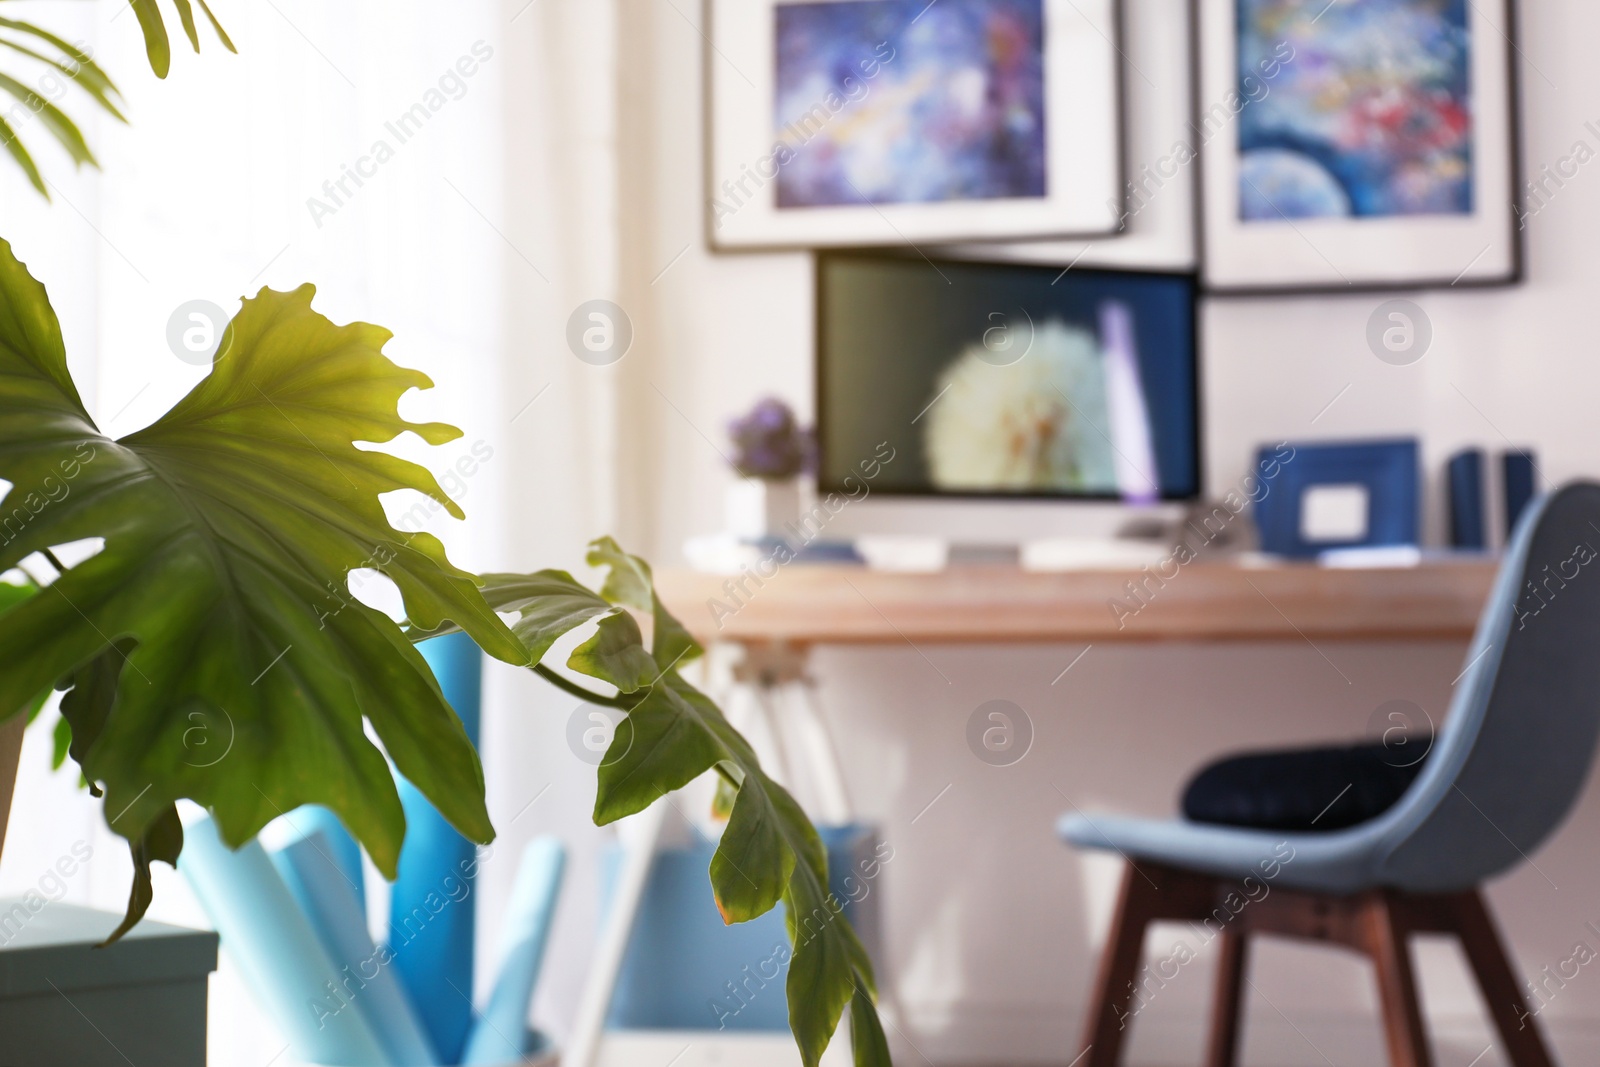 Photo of Exotic plant with green leaves and blurred workplace interior on background